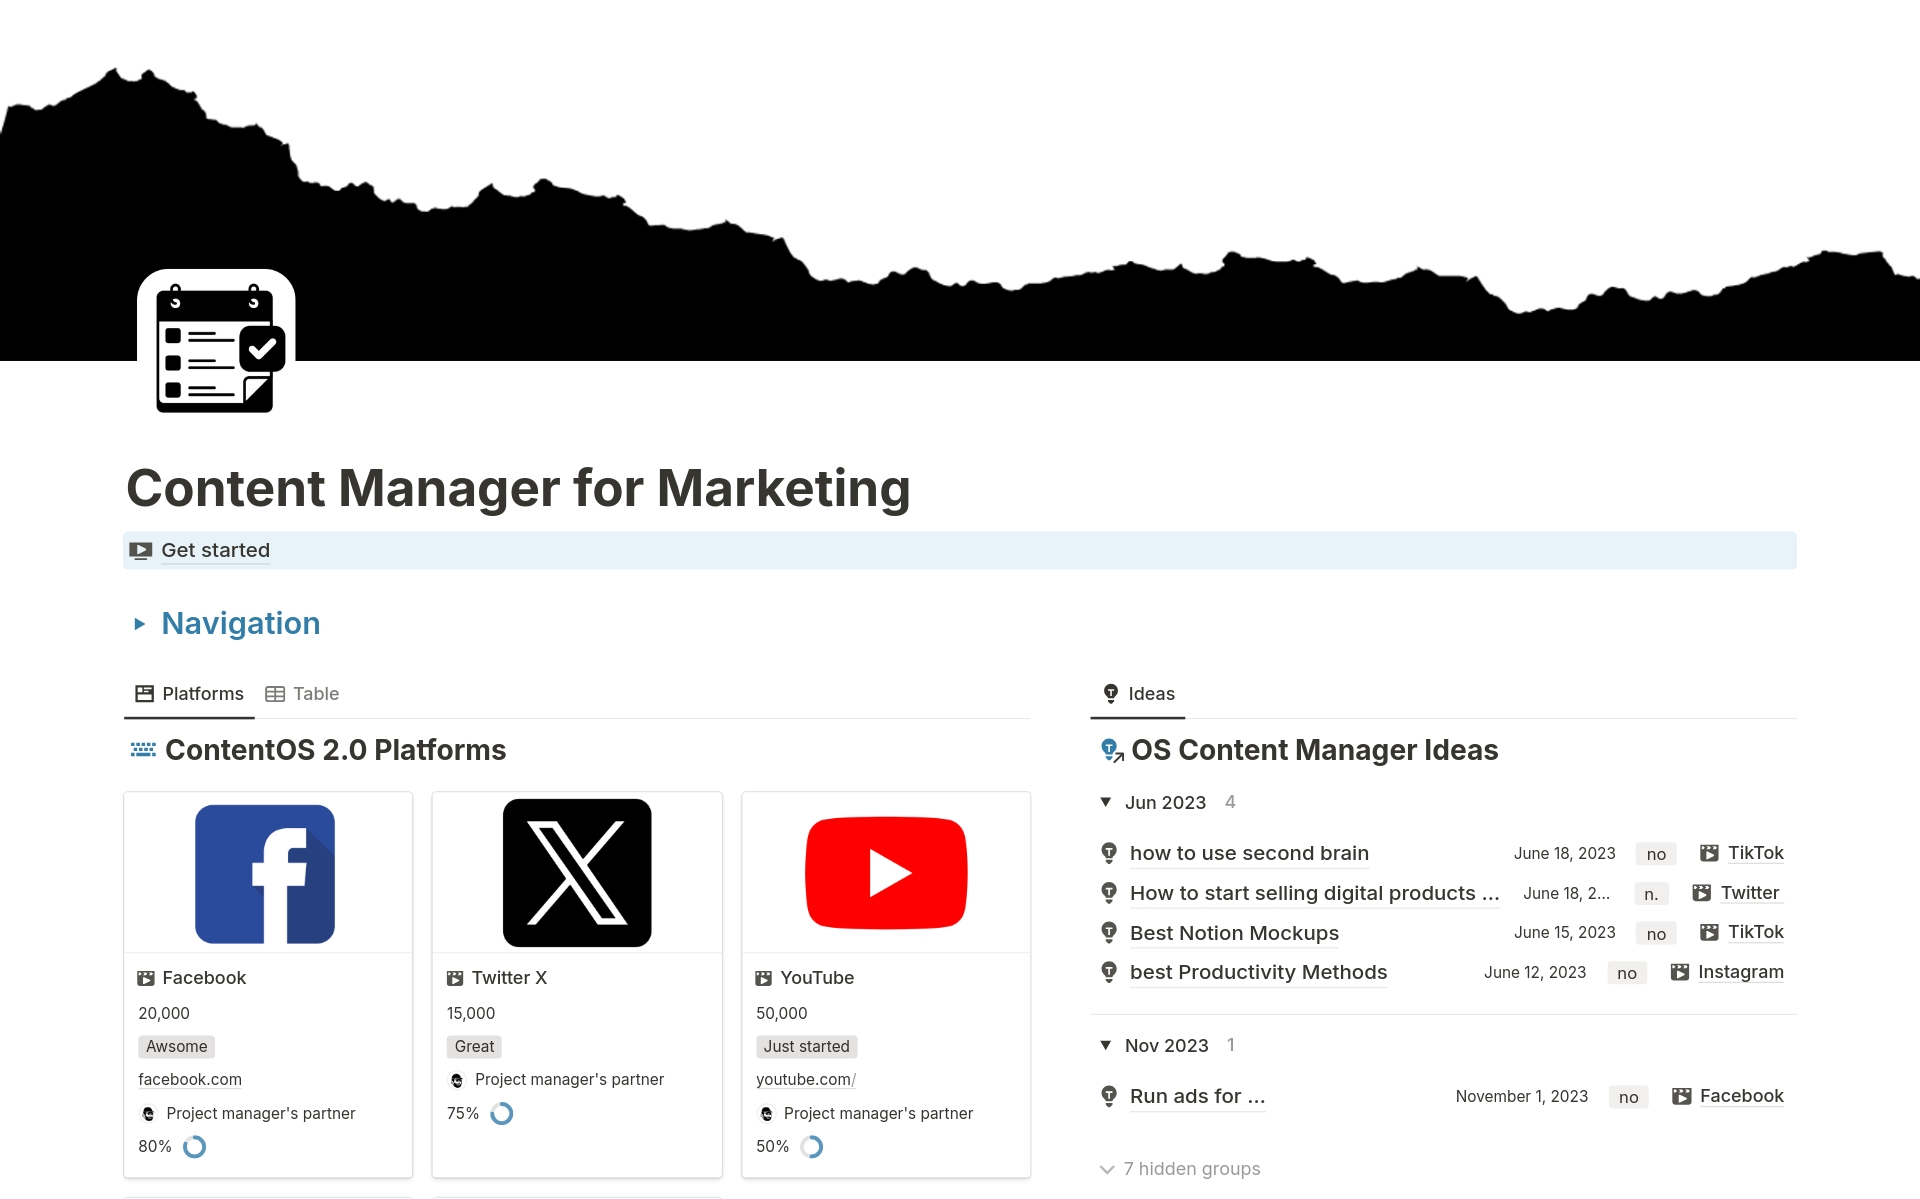 Content for Marketing: Boost your marketing strategy with our suite of content management tools. Create, organize and distribute relevant and engaging content to your audience, and track the performance of your campaigns for better results.